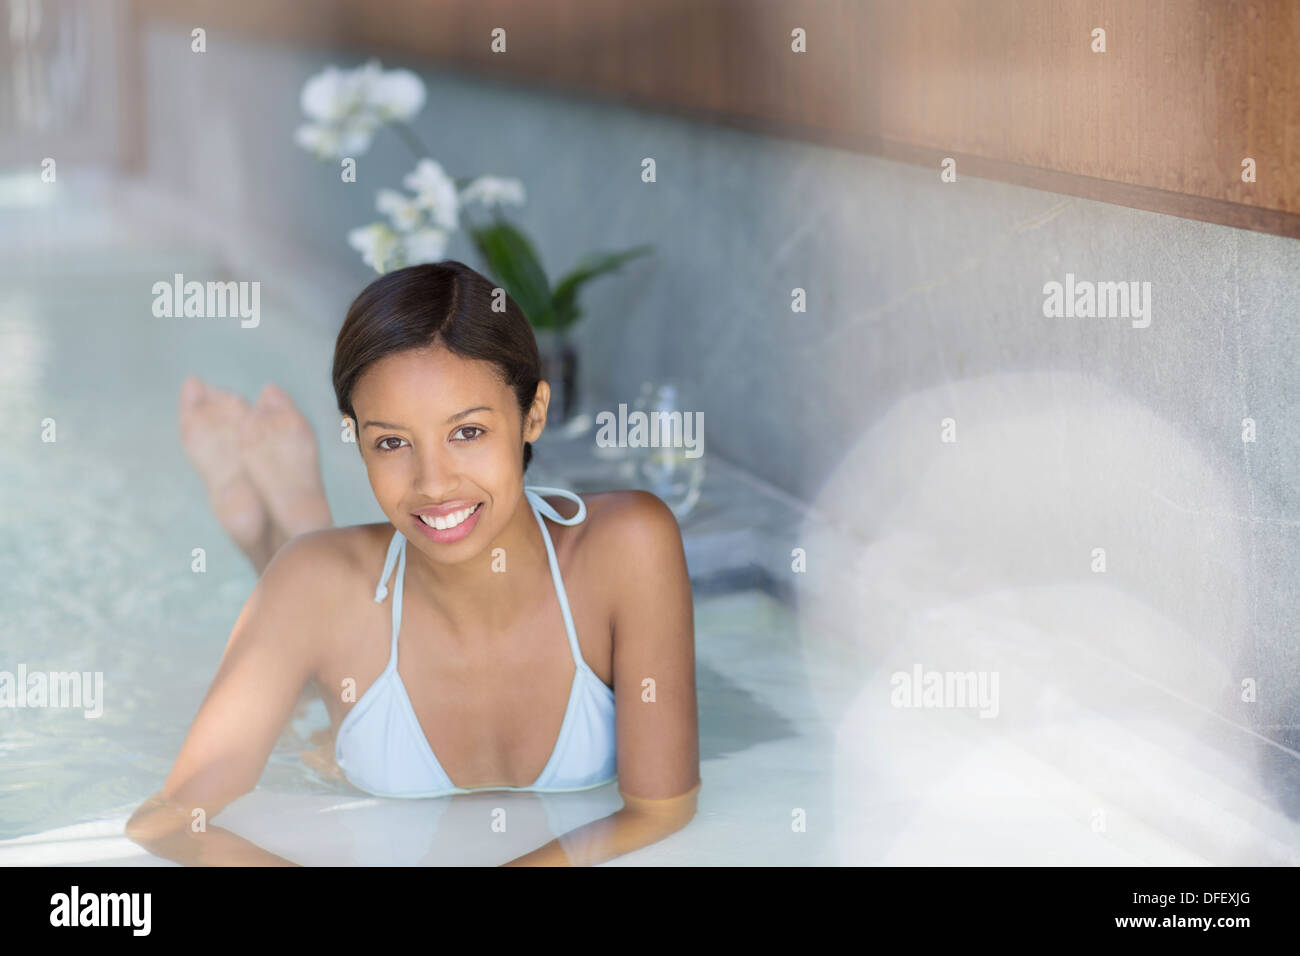 Woman relaxing in spa pool Banque D'Images